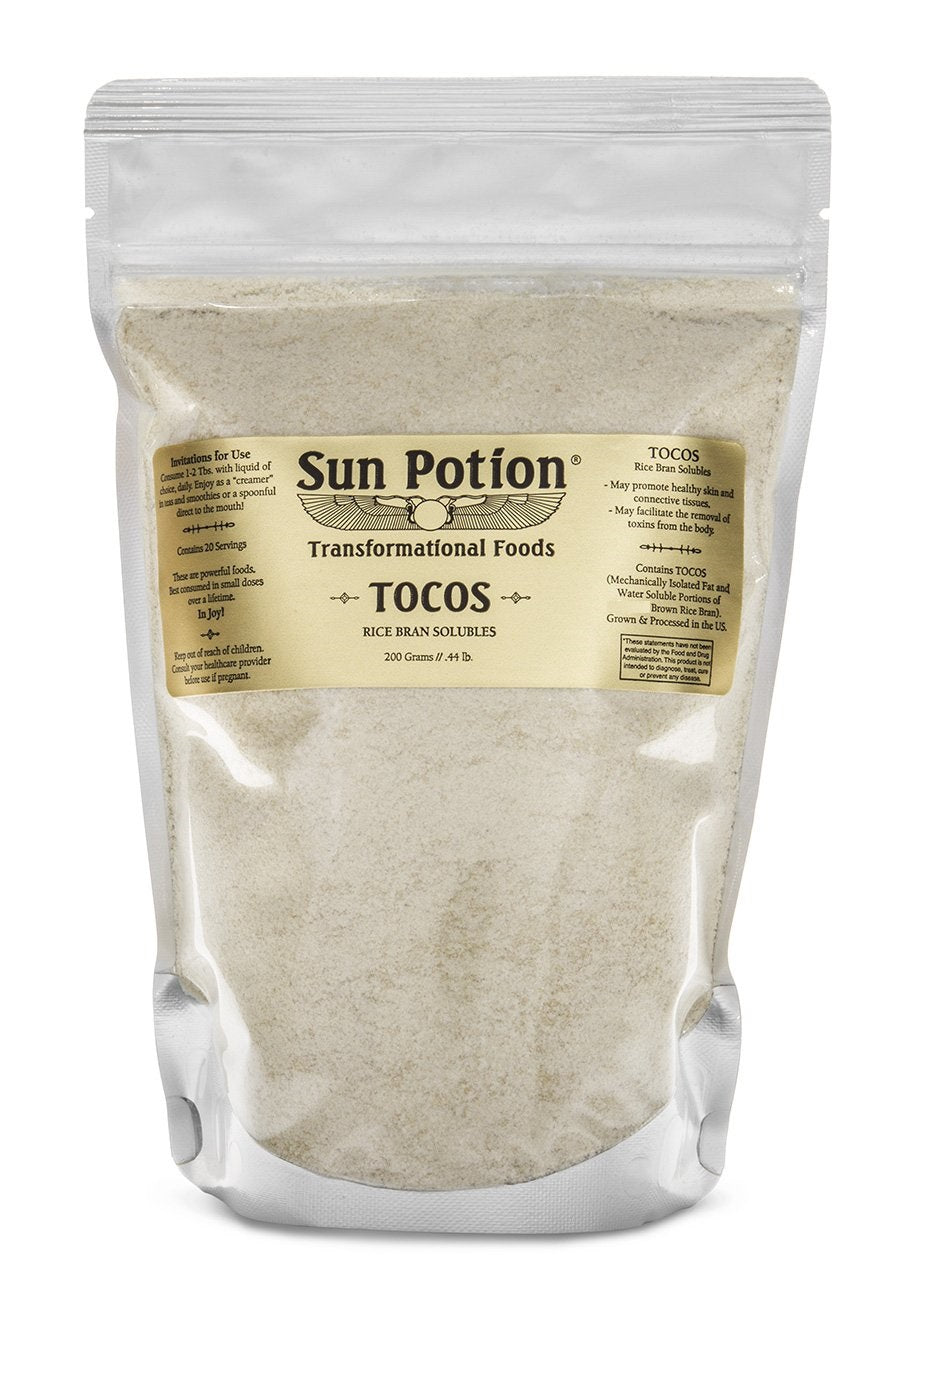 TOCOS (Rice Bran Solubles)